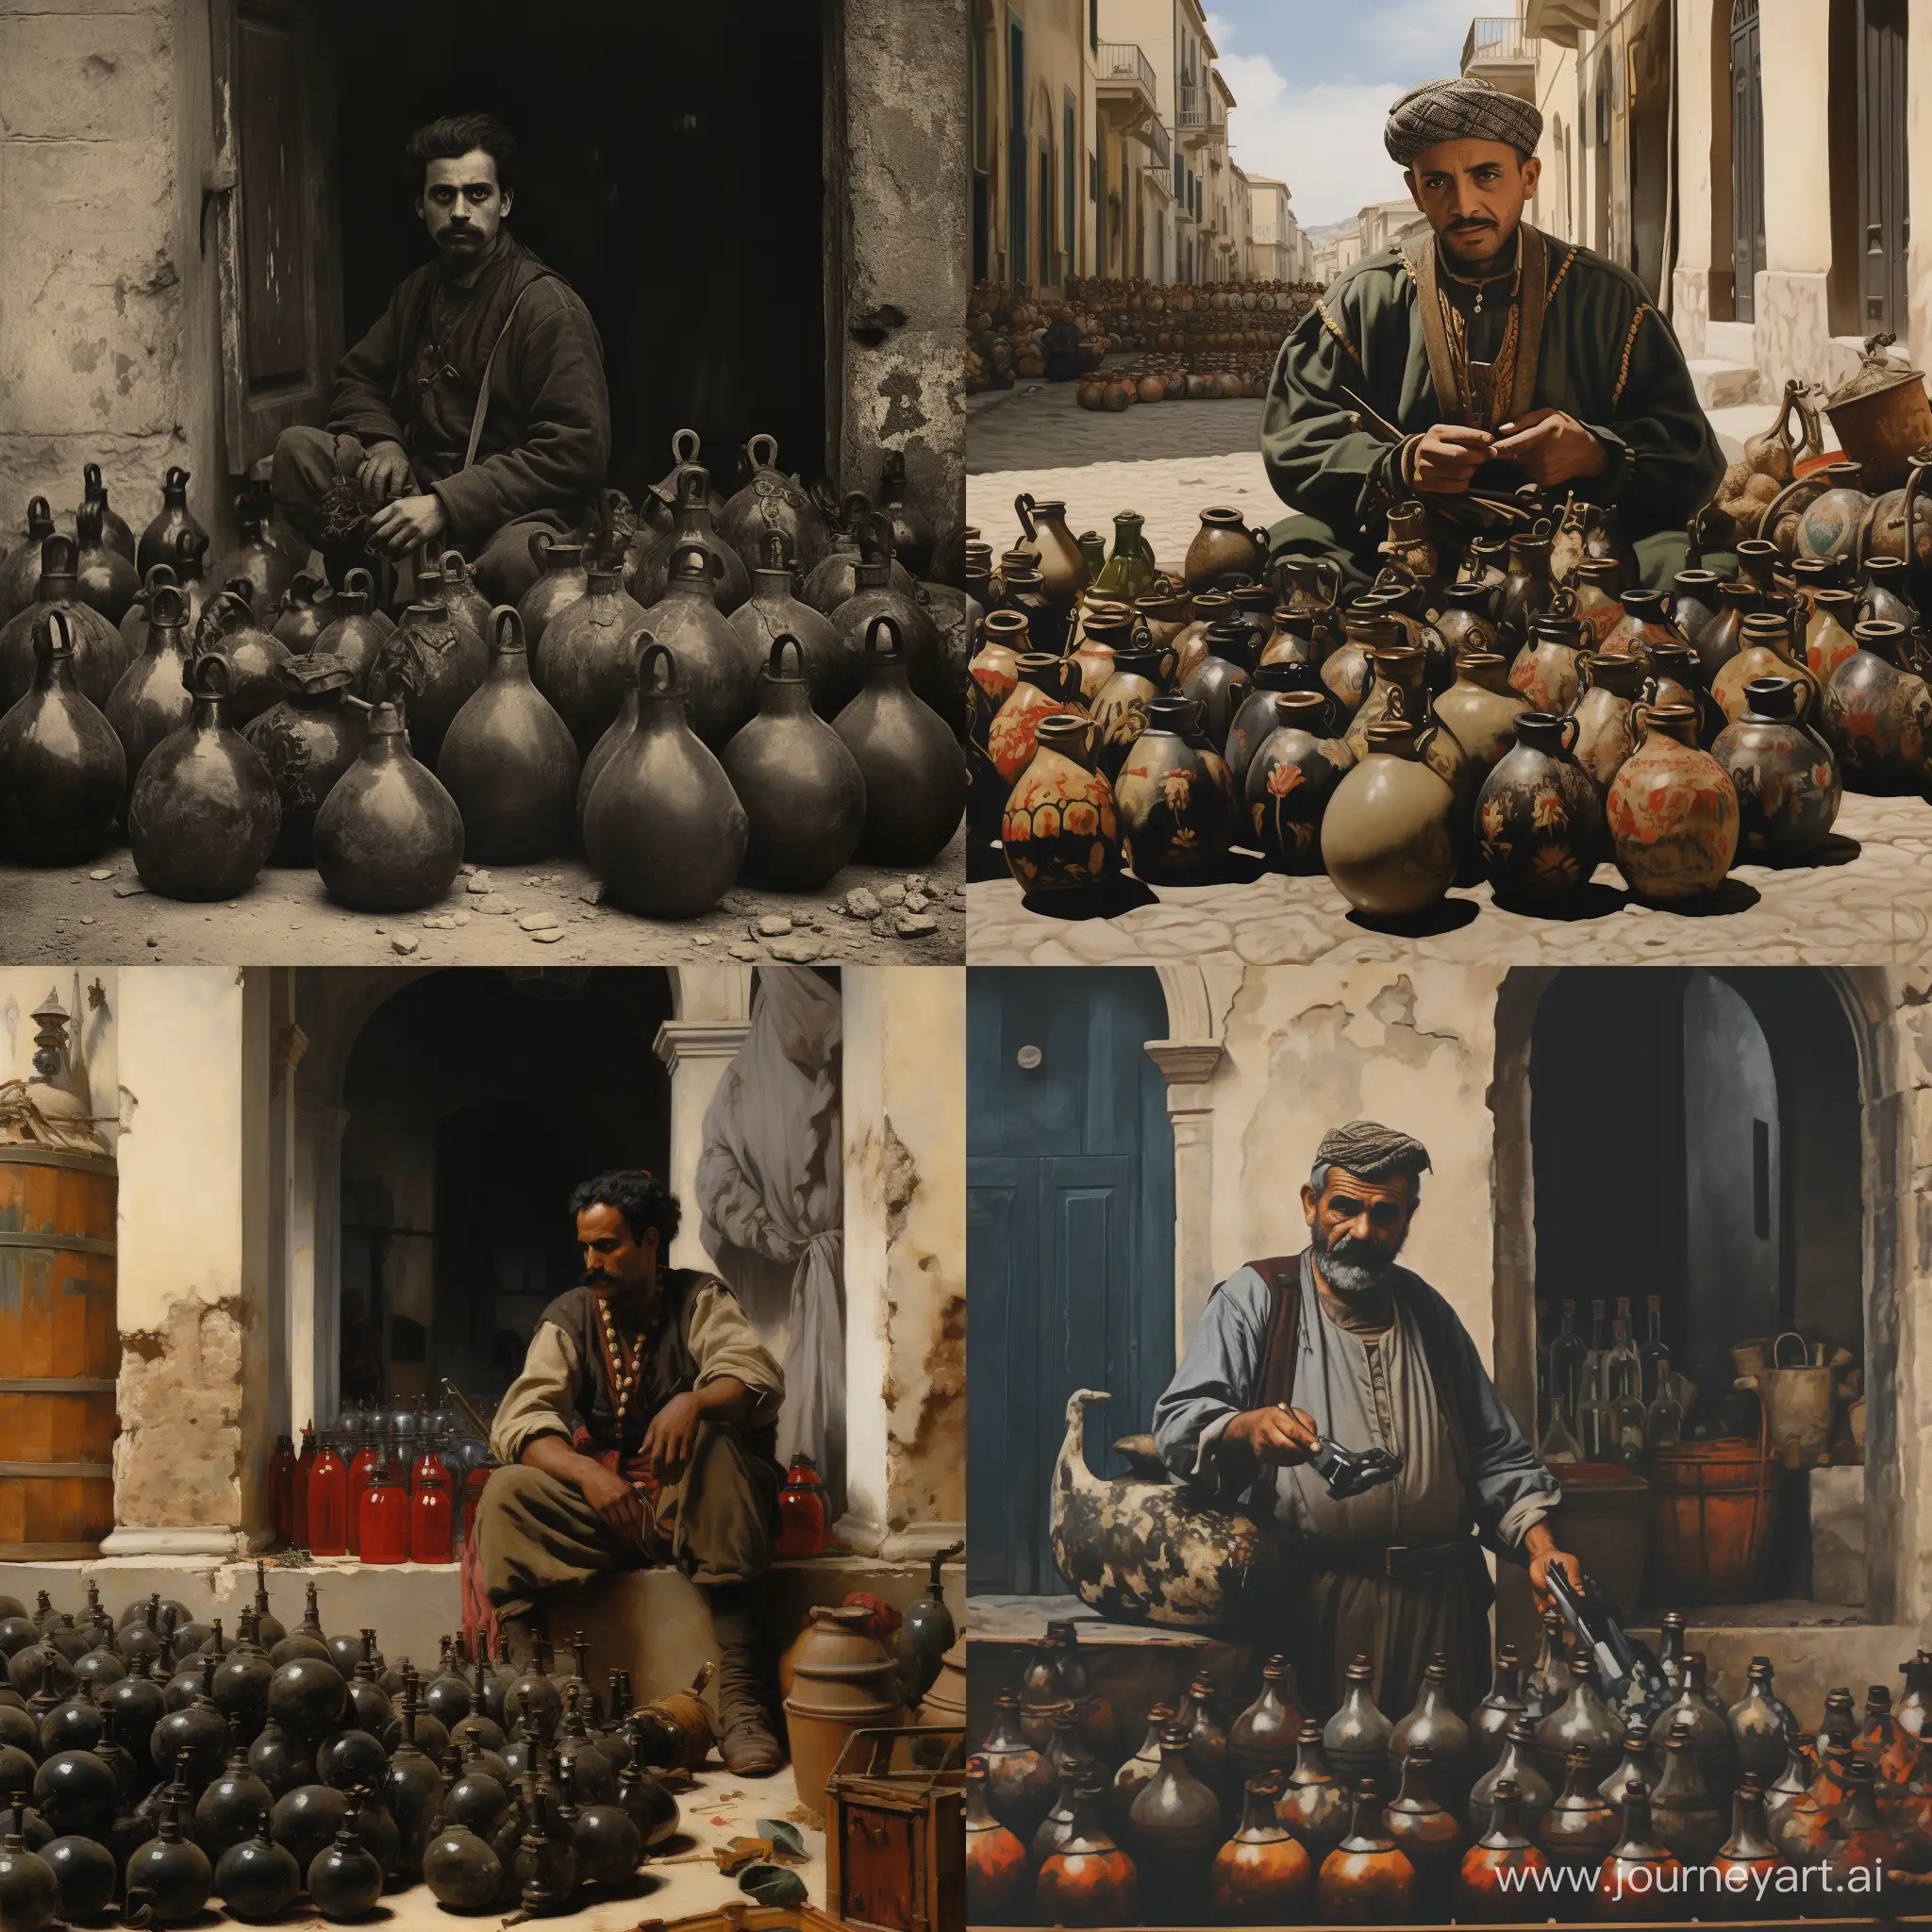 Authentic-Sicilian-Grenade-Seller-Displaying-Arsenal-AR-11